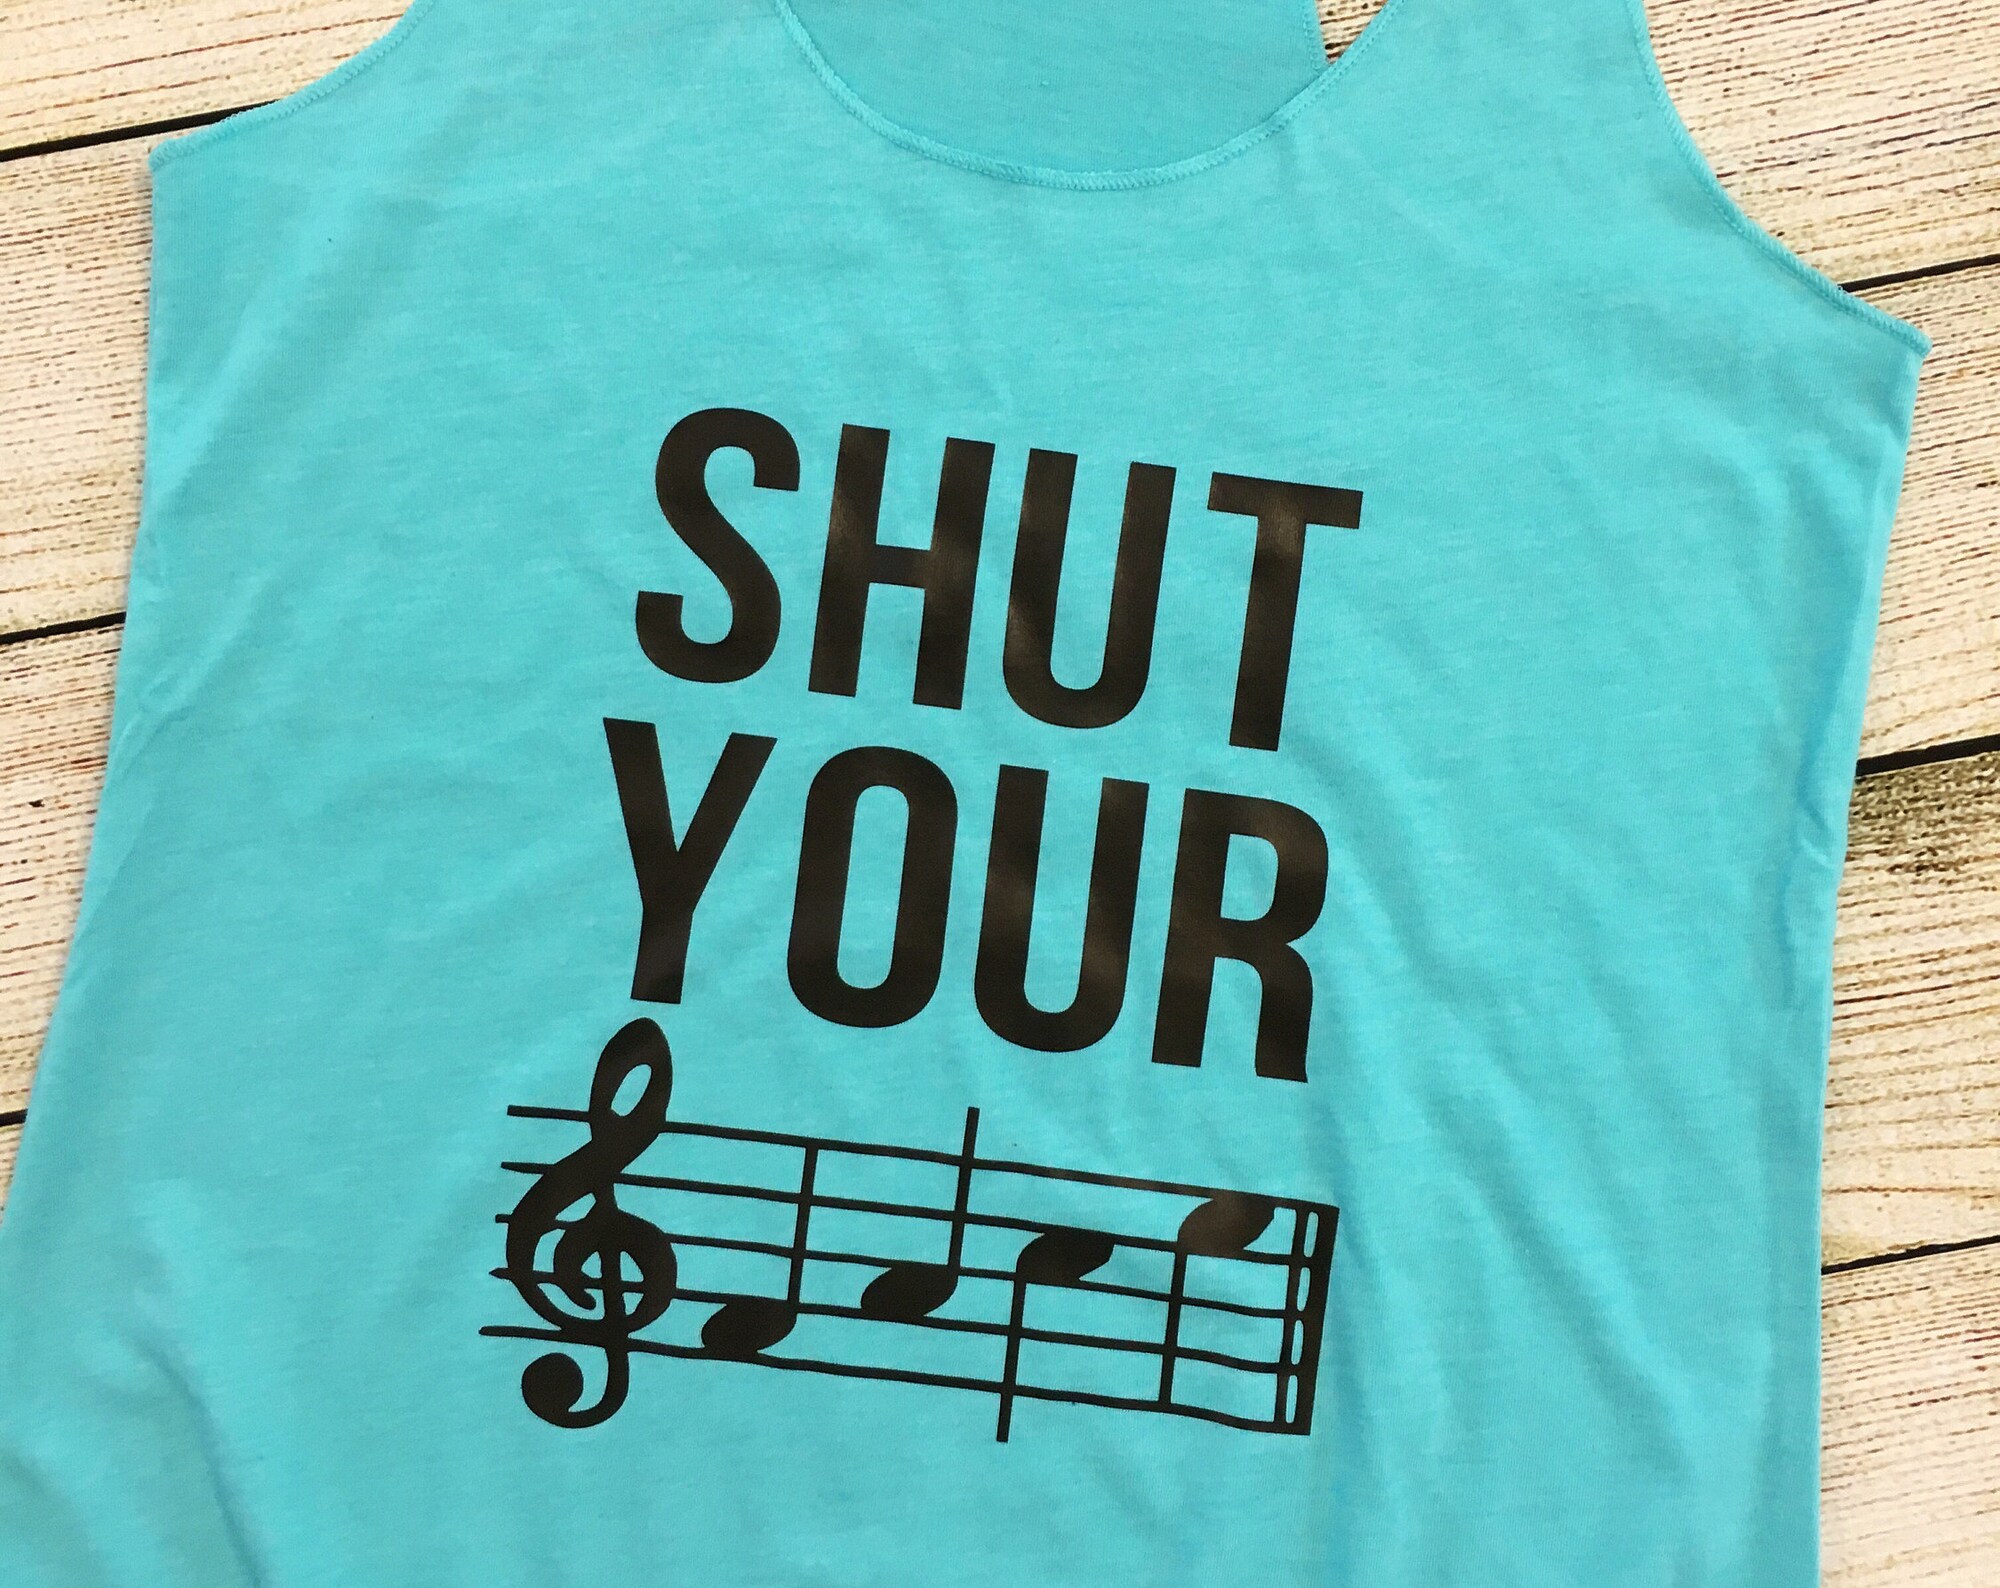 Discover Shut Your FACE musical notes tank top